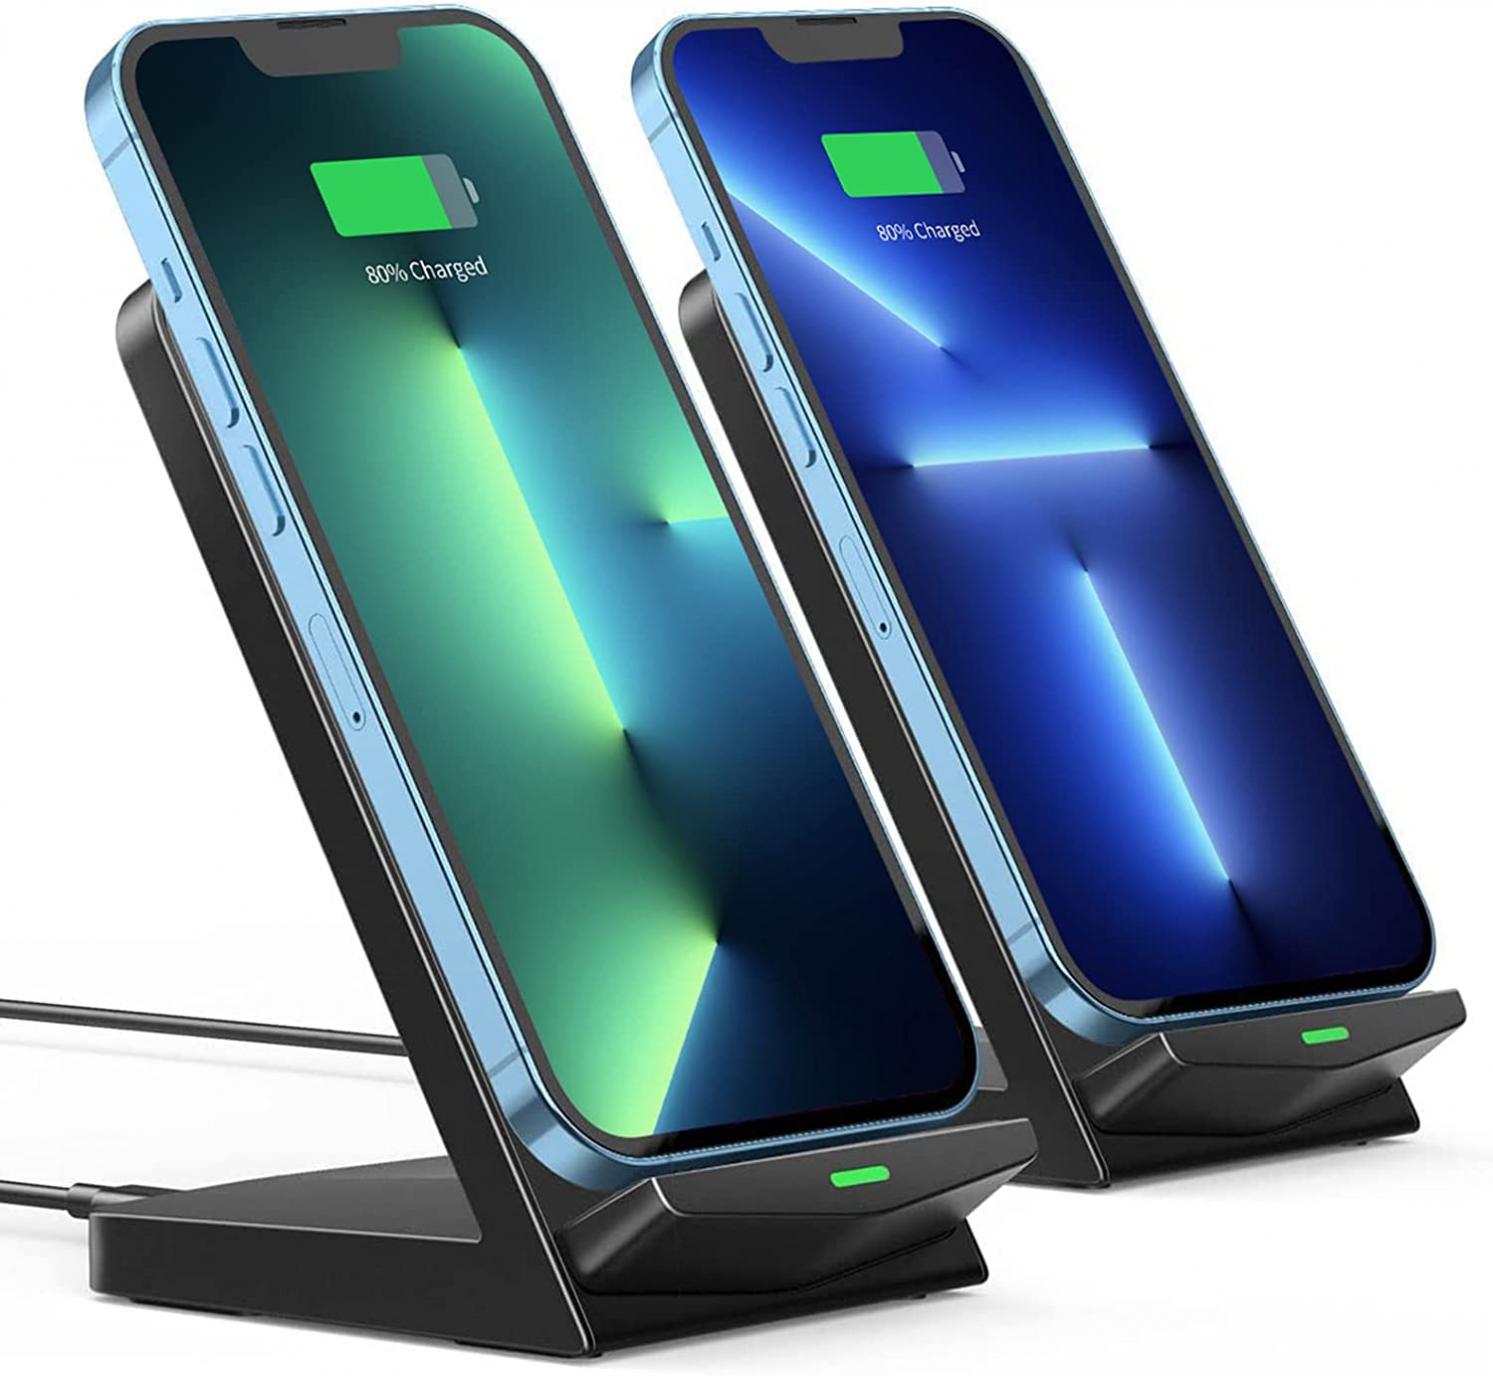 Wireless Charger 2 Pack, iPhone Wireless Charger Stand,15W Fast Qi Wireless Charger Compatible with iPhone14/13/12/11Pro Max/XR/X/8,Galaxy S22/S21/S20/S10,Pixel,All Qi-Enable Phones